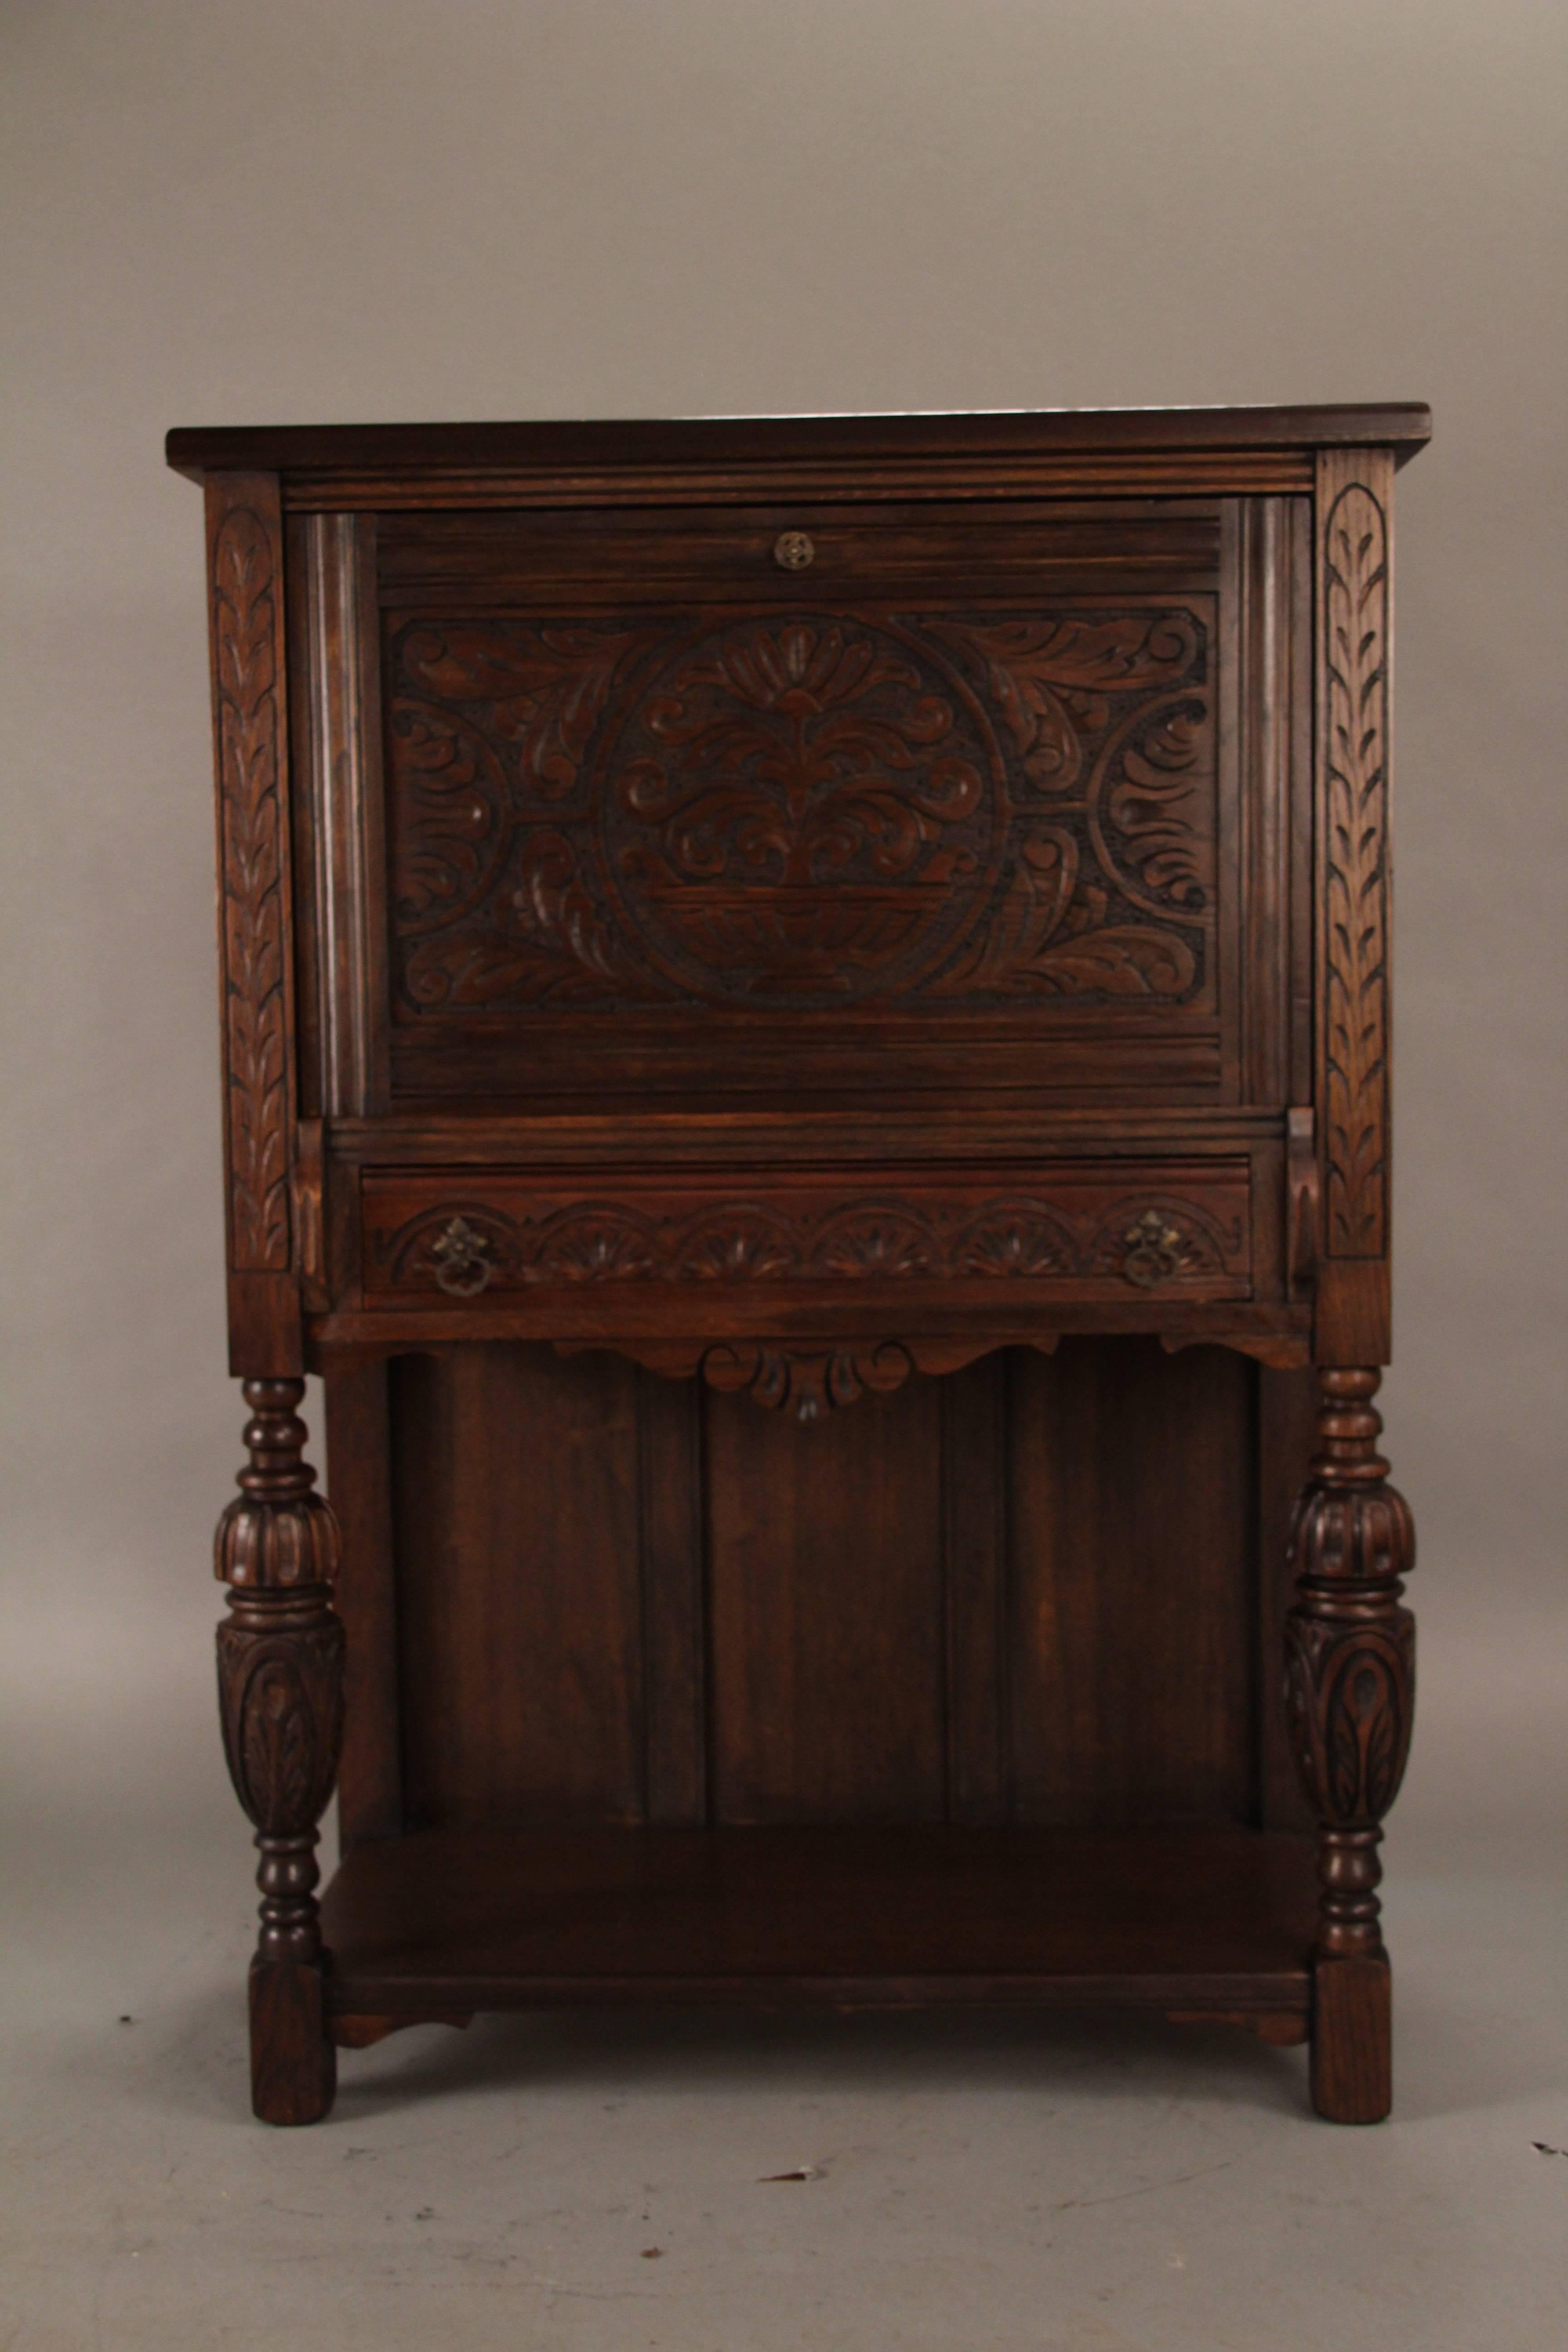 Spanish Colonial Carved Walnut Cabinet/ Writing Desk from the Angelus Furniture Co, circa 1920s